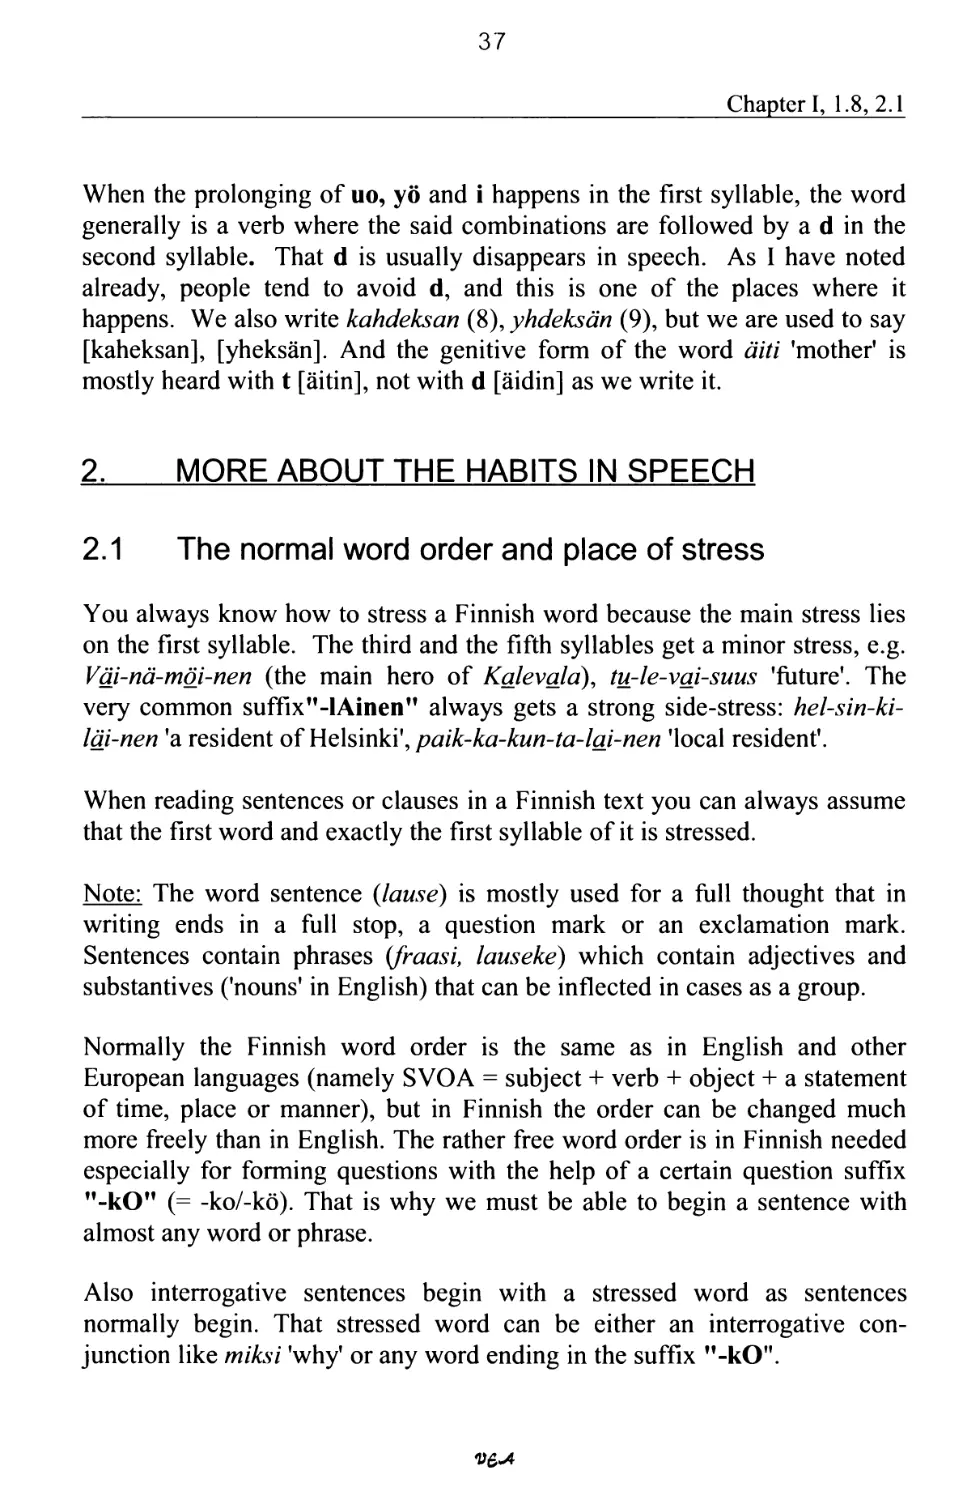 2. MORE ABOUT THE HABITS IN SPEECH